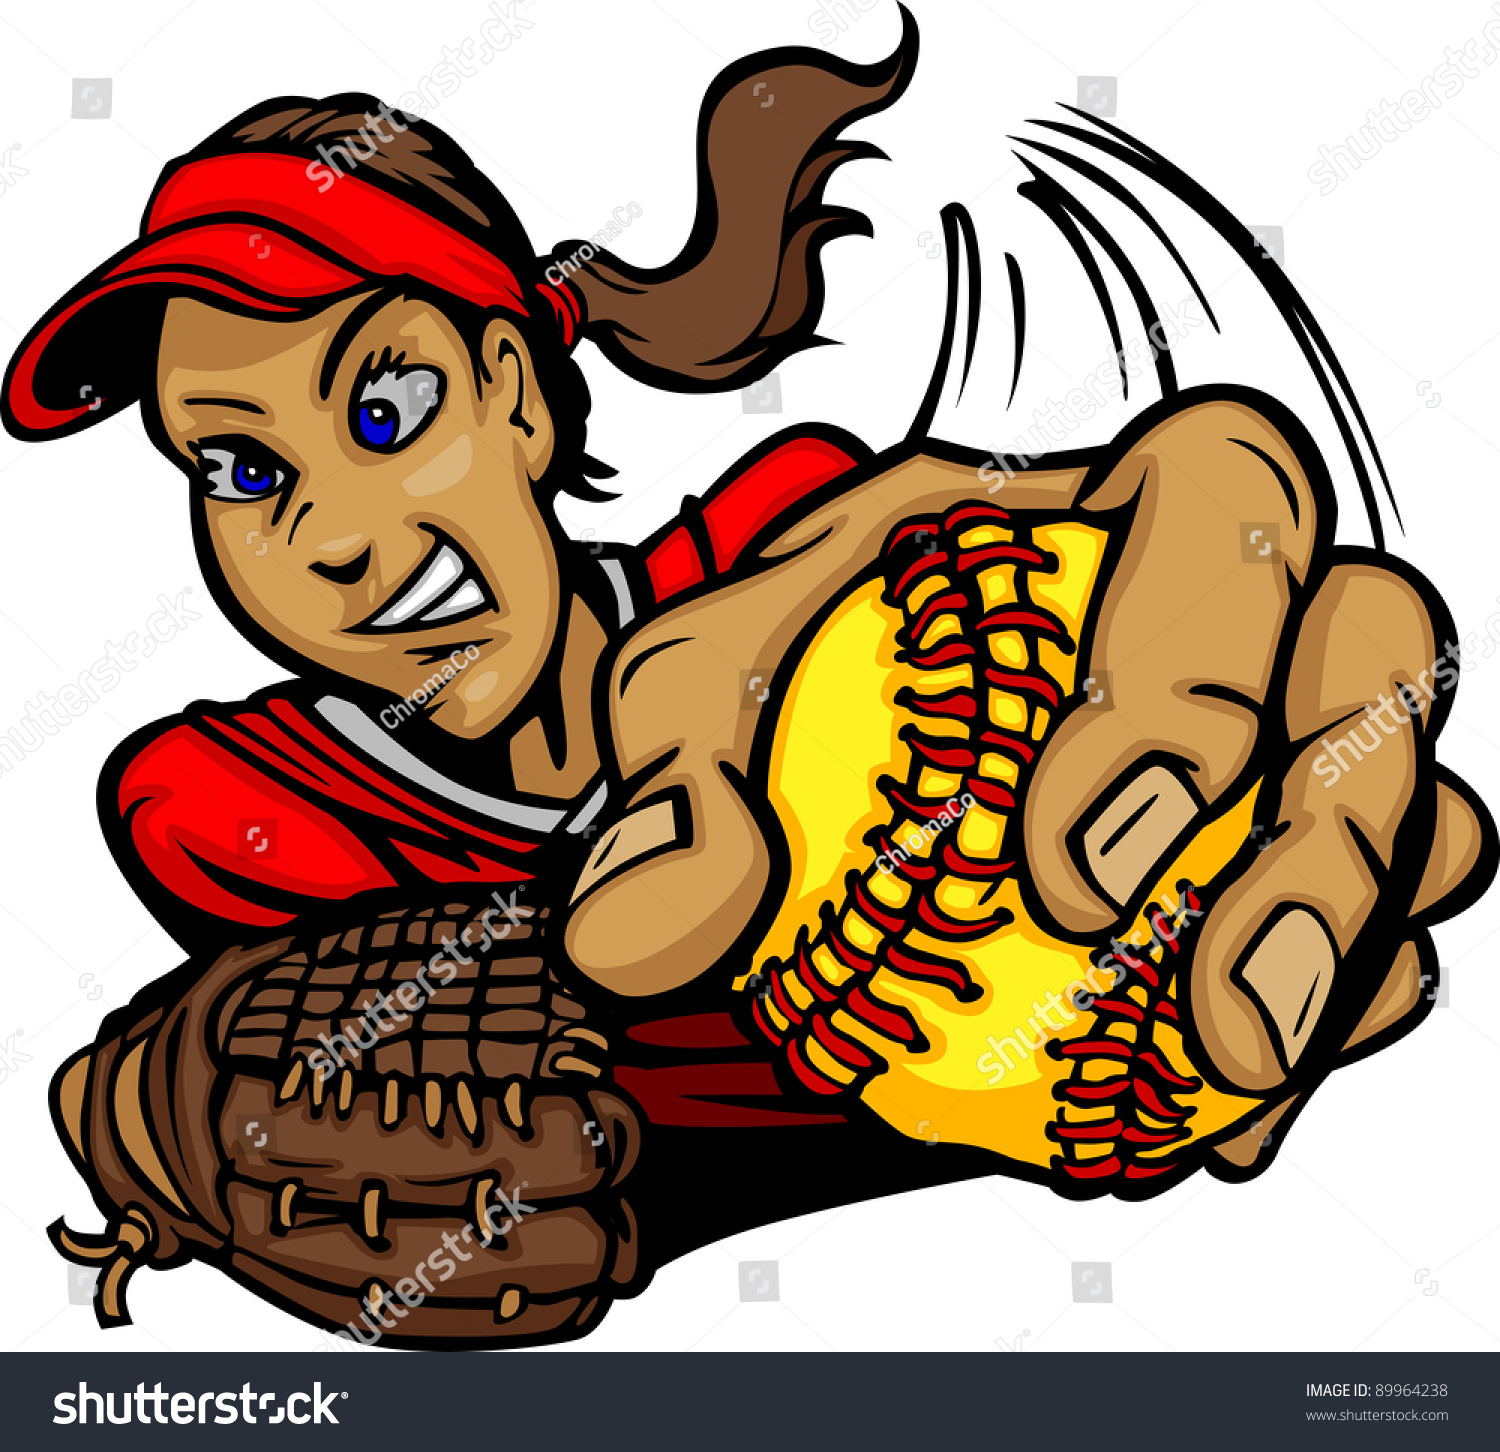 Vector Cartoon Of A Fastpitch Softball Player Pitching - 89964238